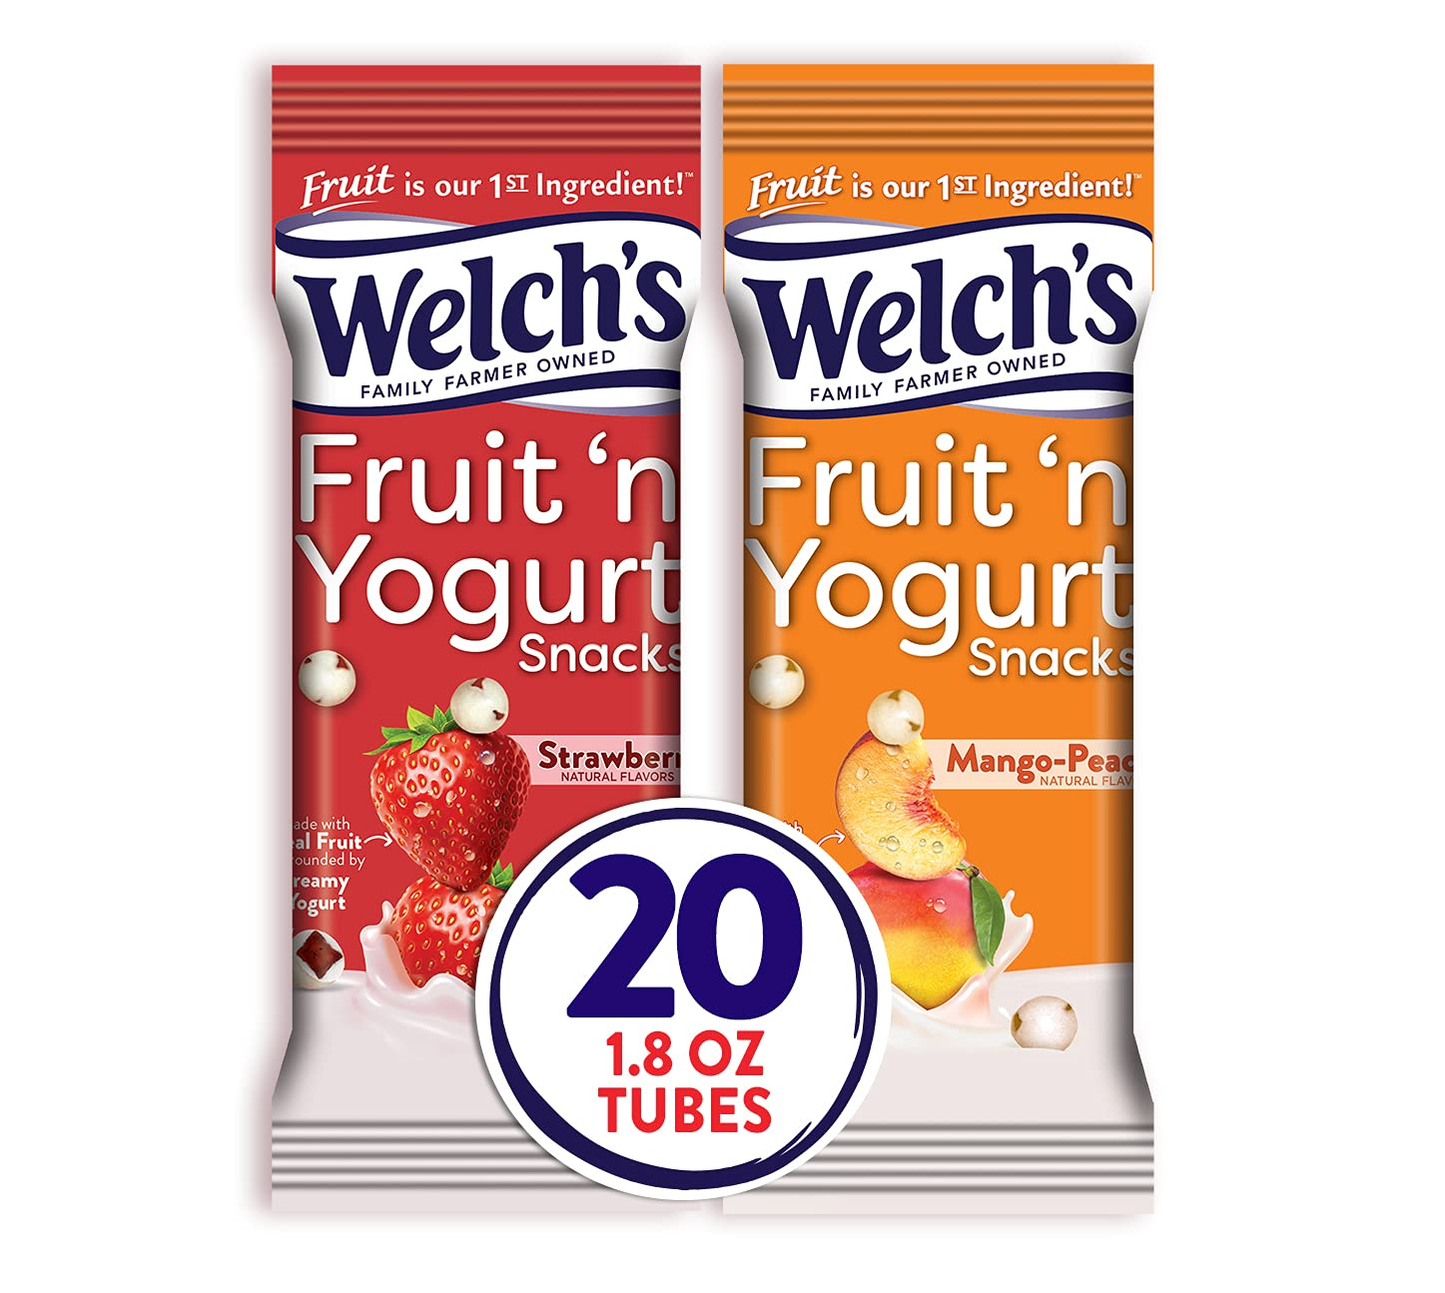 Welch'S Fruit Snacks, Mixed Fruit, Gluten Free, Bulk Pack, 0.9 Oz Individual Single Serve Bags 40 Count (Pack of 1)